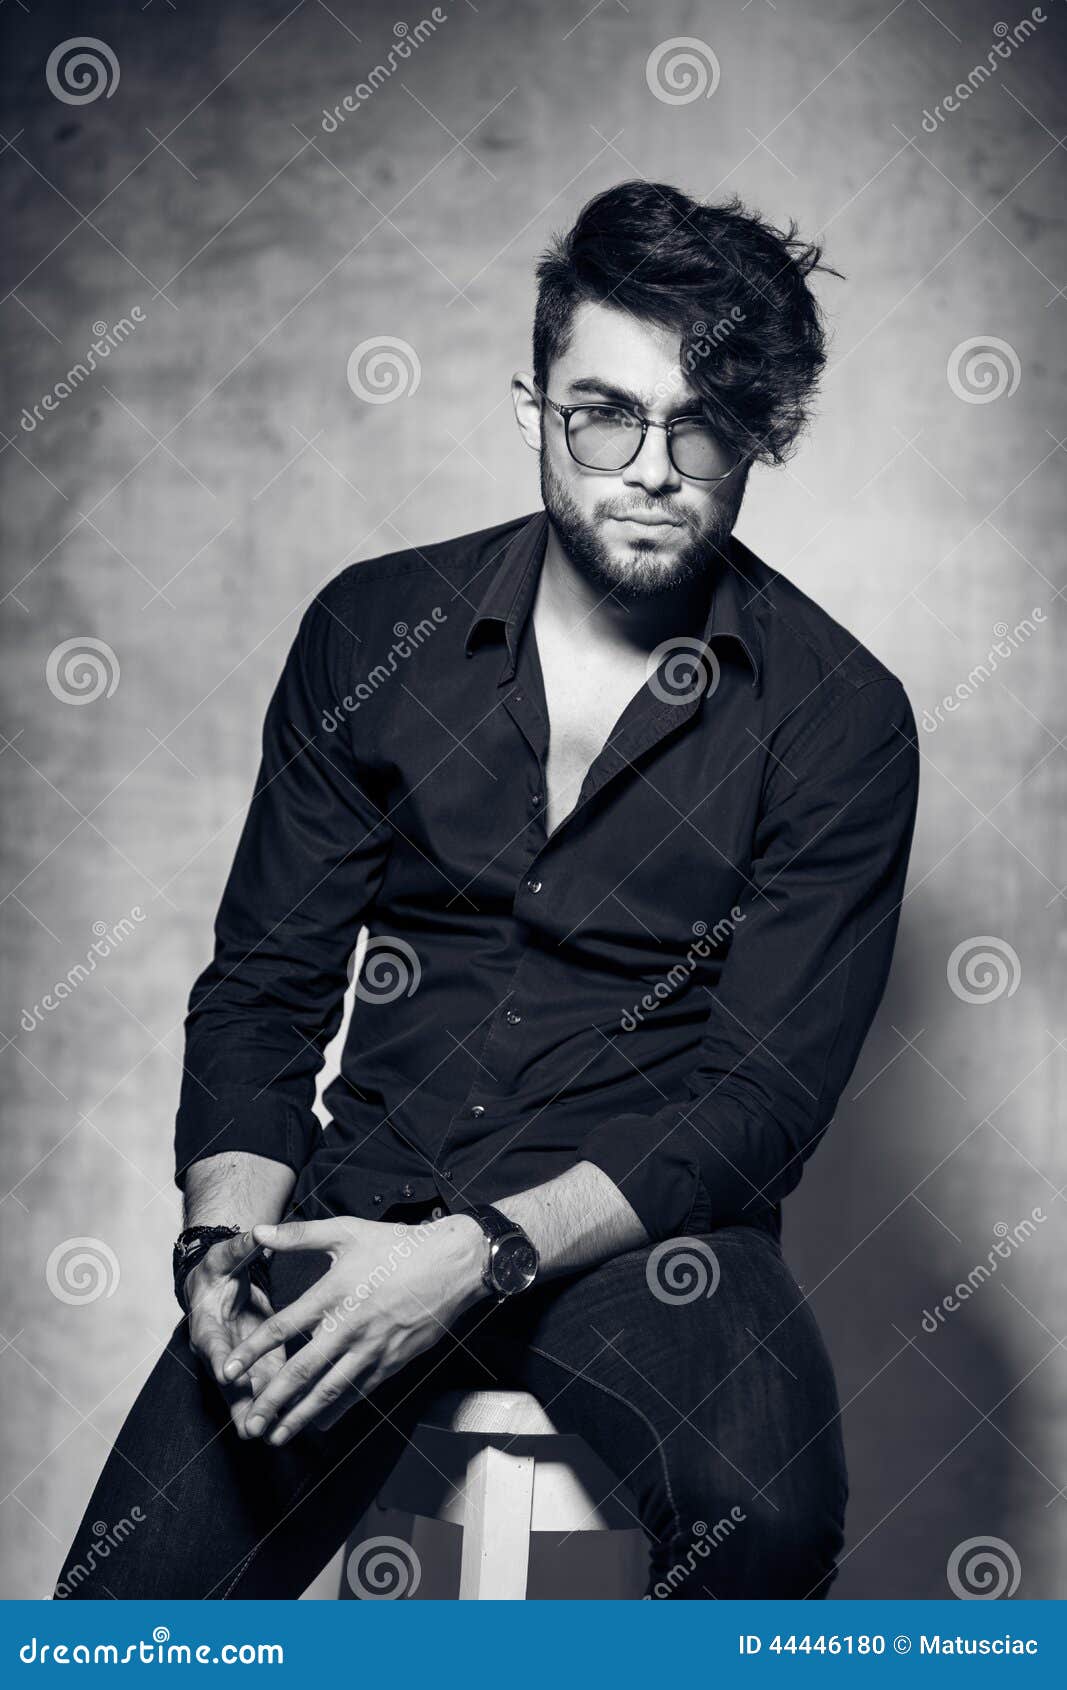 sexy fashion man model dressed casual wearing glasses posing dramatic against grunge wall 44446180